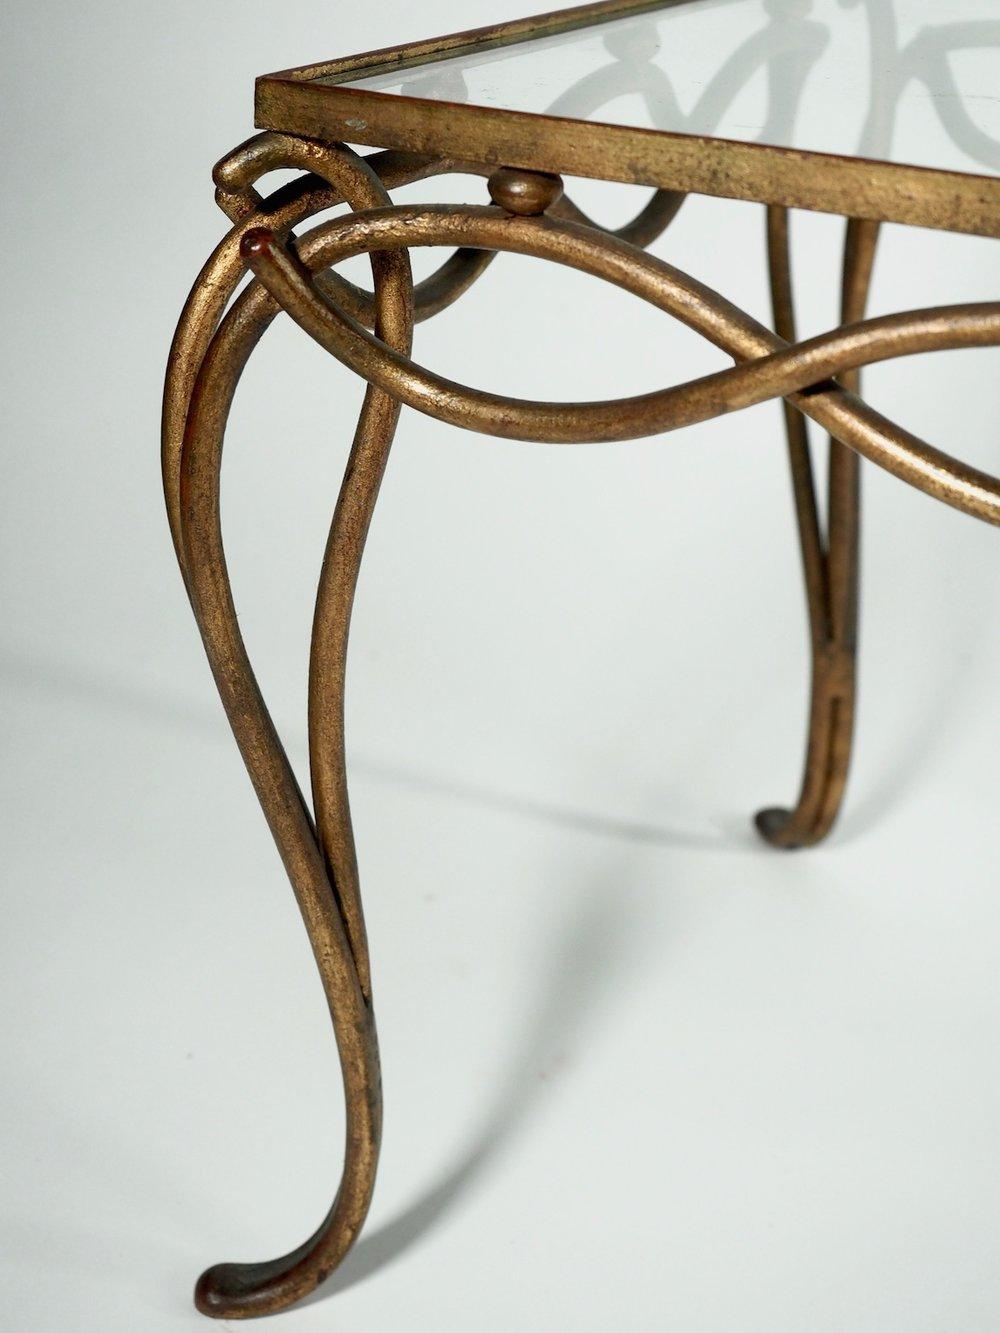 Rene Drouet Gilt Forged Iron Coffee Table In Excellent Condition For Sale In Philadelphia, PA